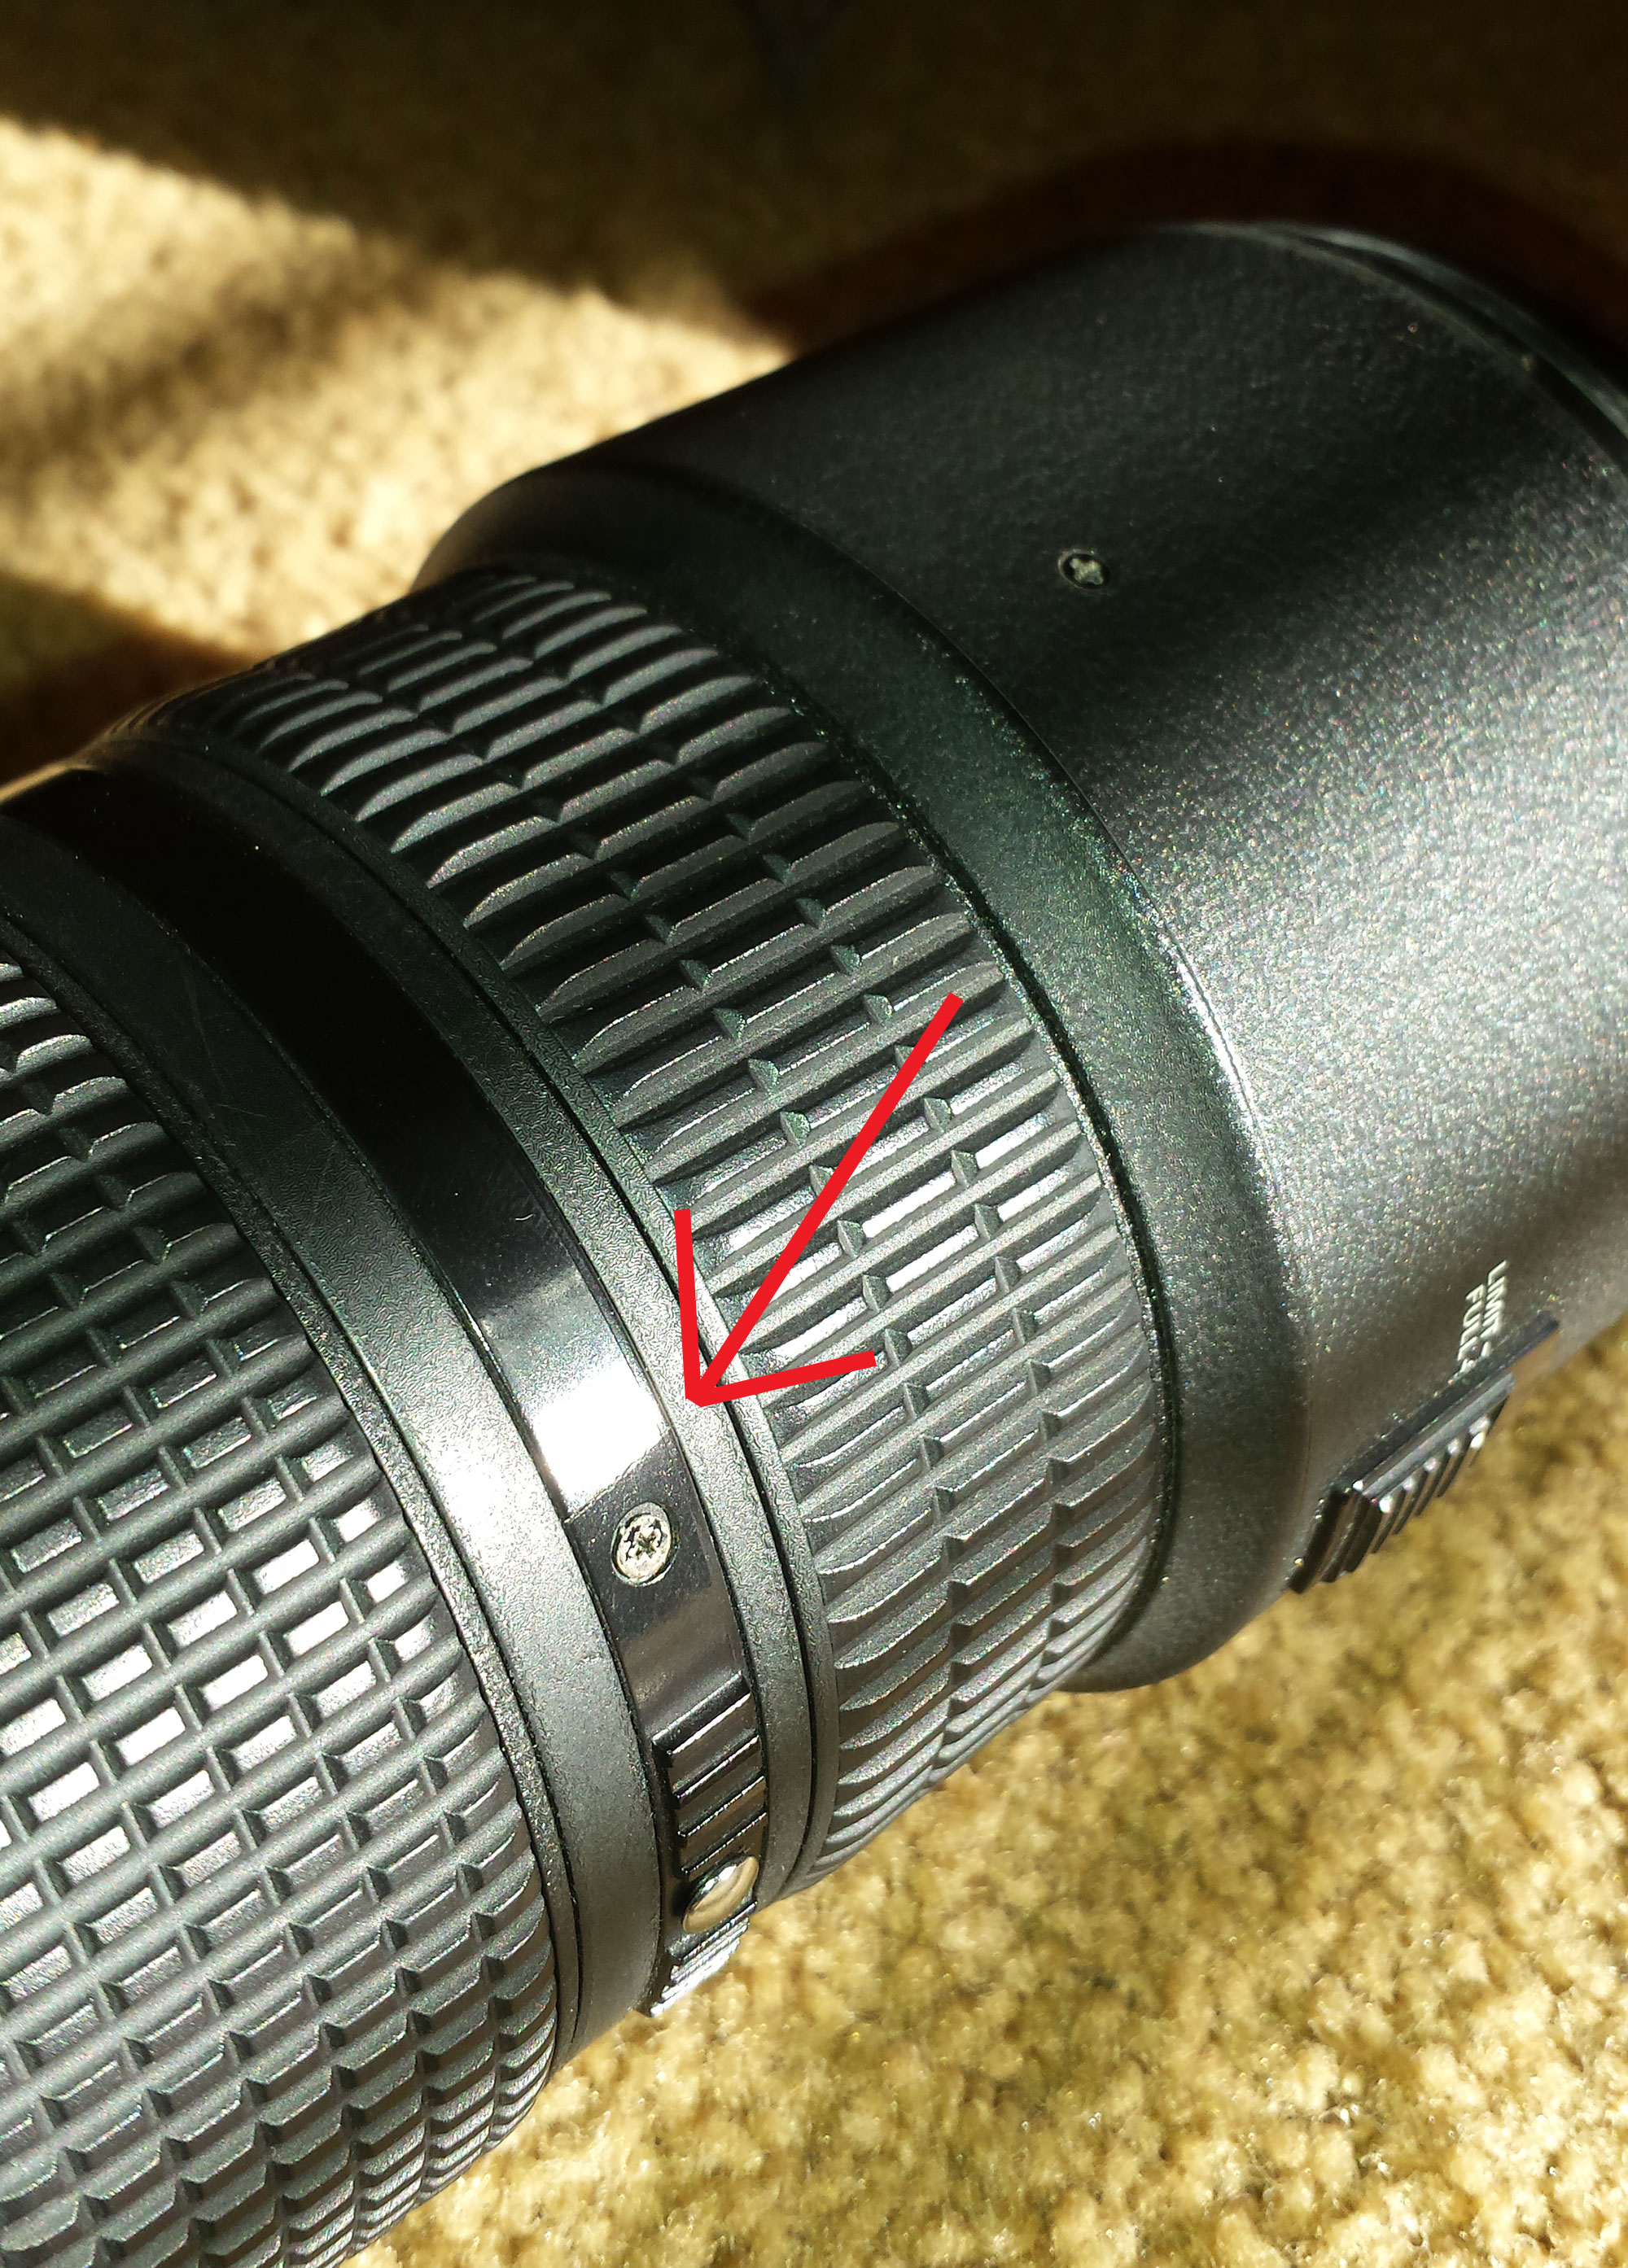 Repair cost for Nikon 80-200mm F2.8D ED AF Cracked A-M Ring